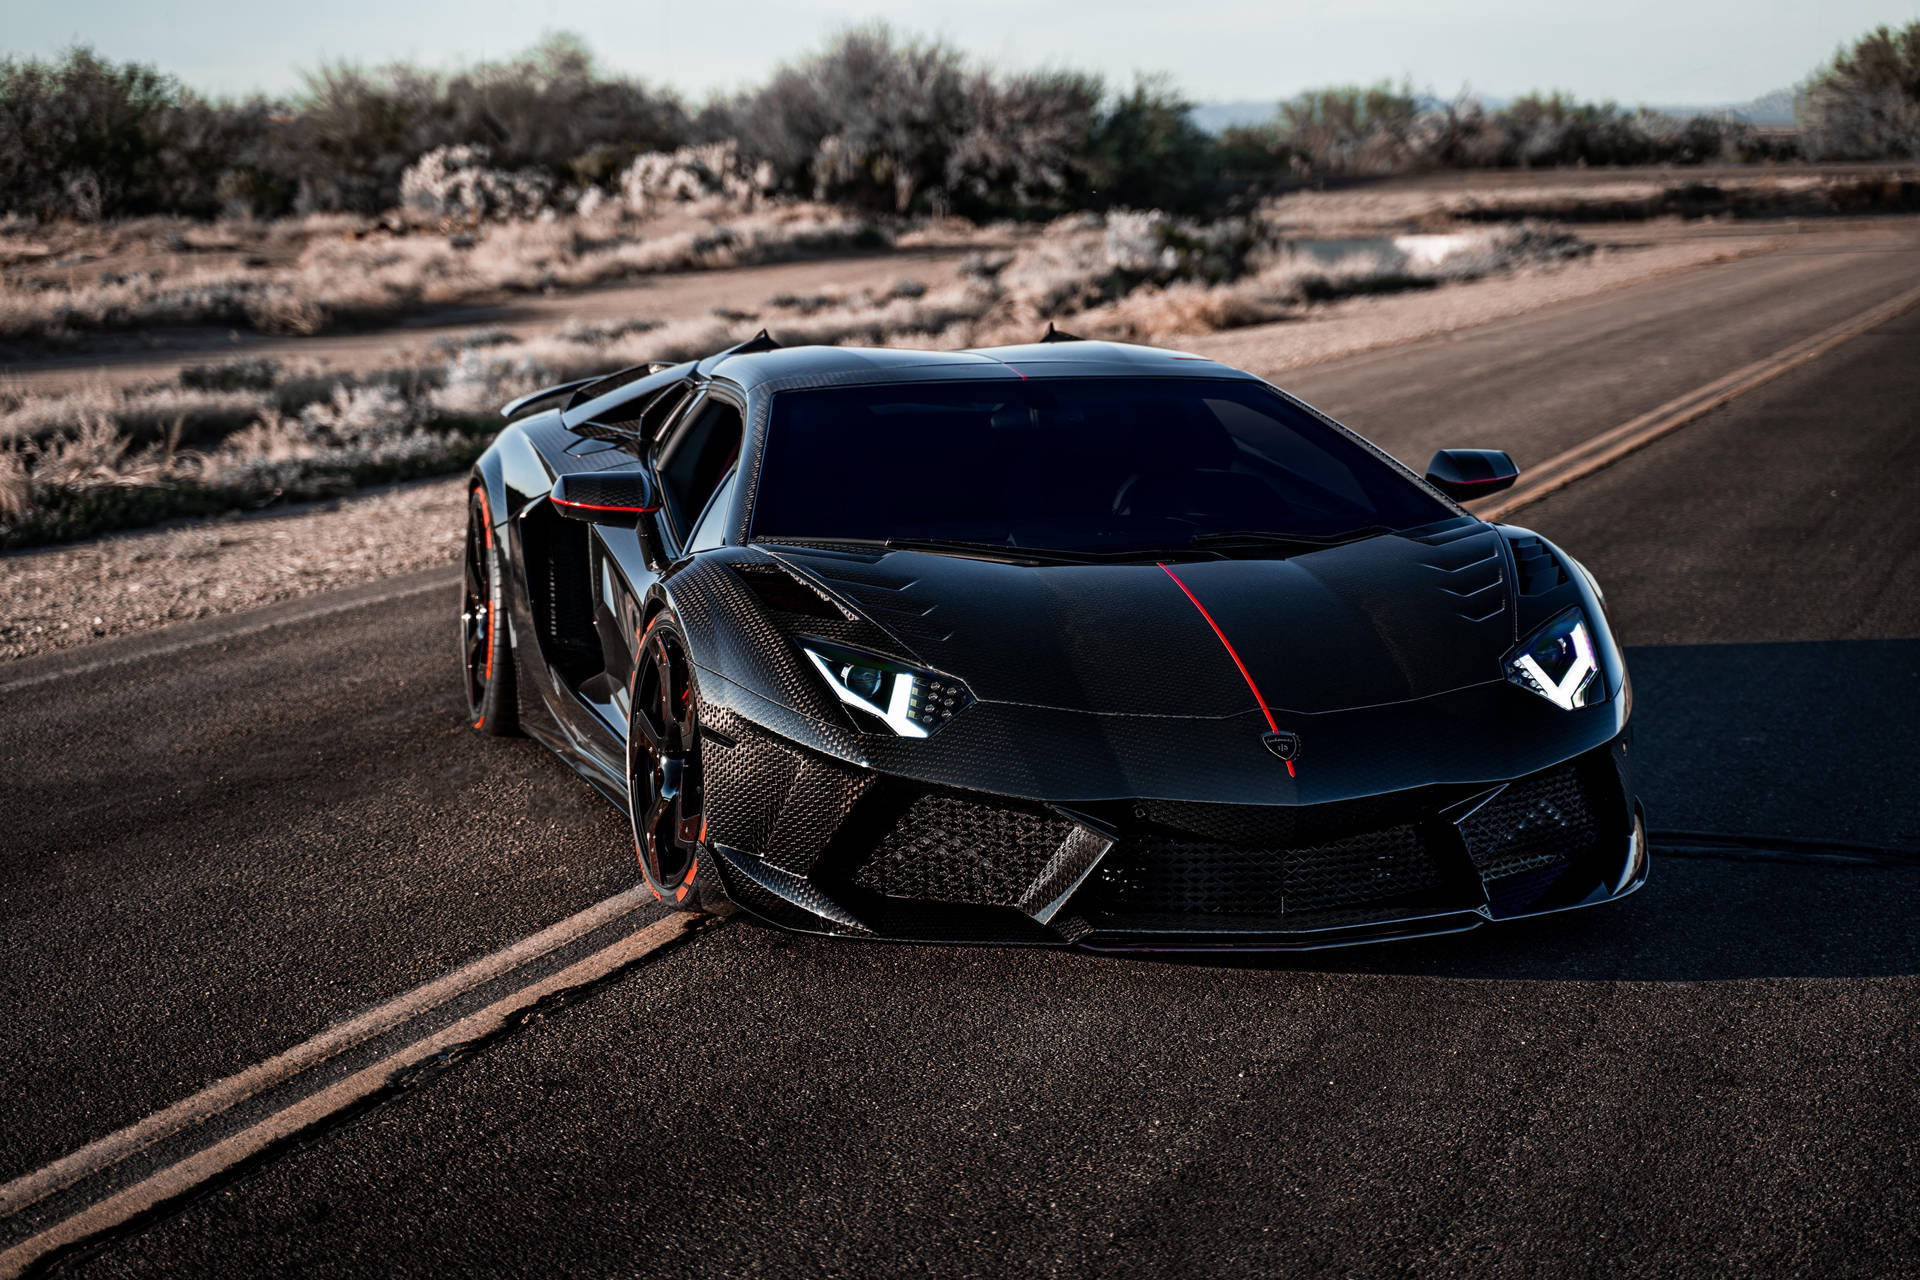 Spectacular View Of A Lamborghini In 4k Resolution Wallpaper